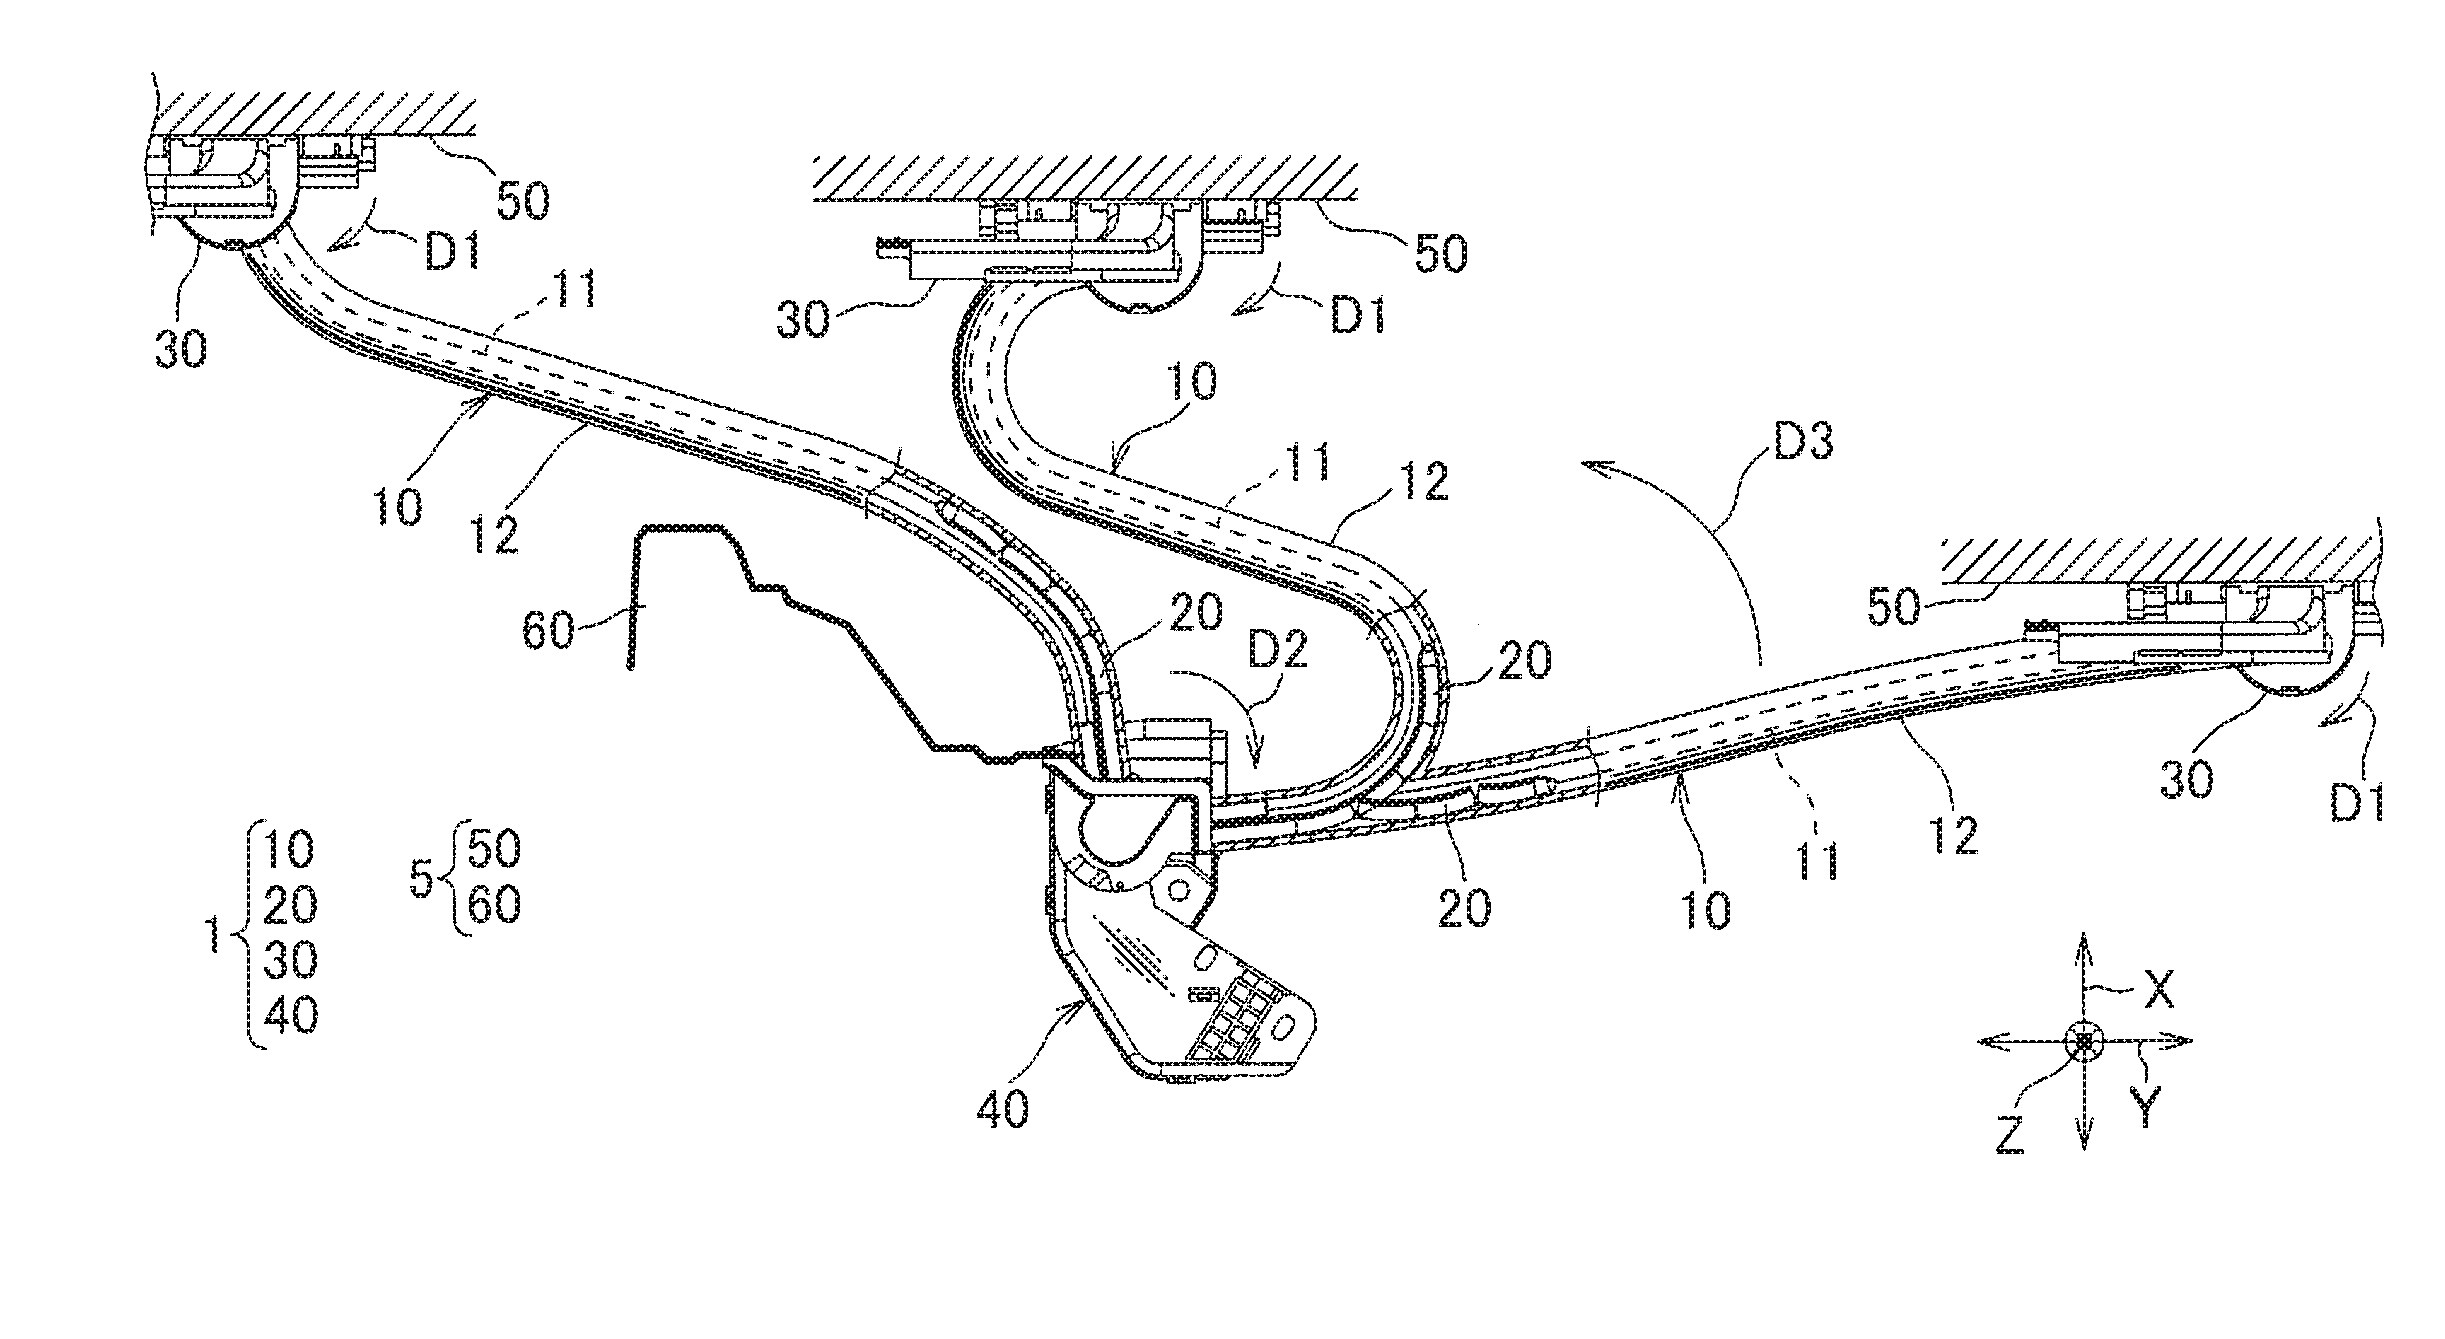 Curvature restraining member and power feeding device